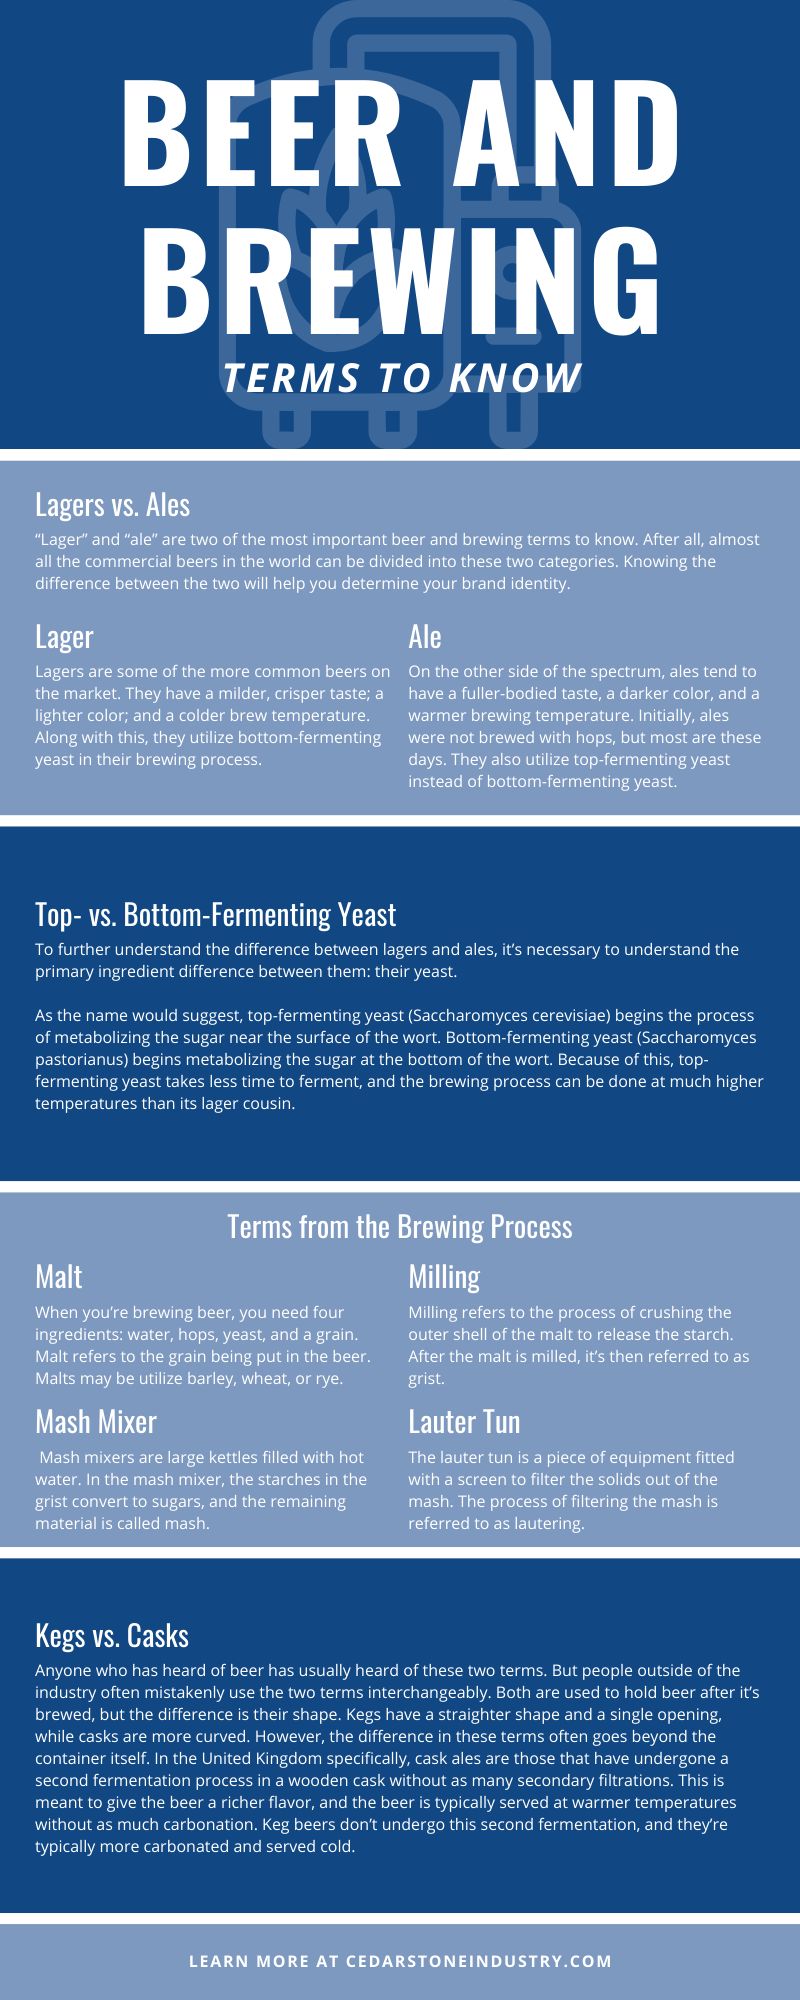 Beer and Brewing Terms To Know